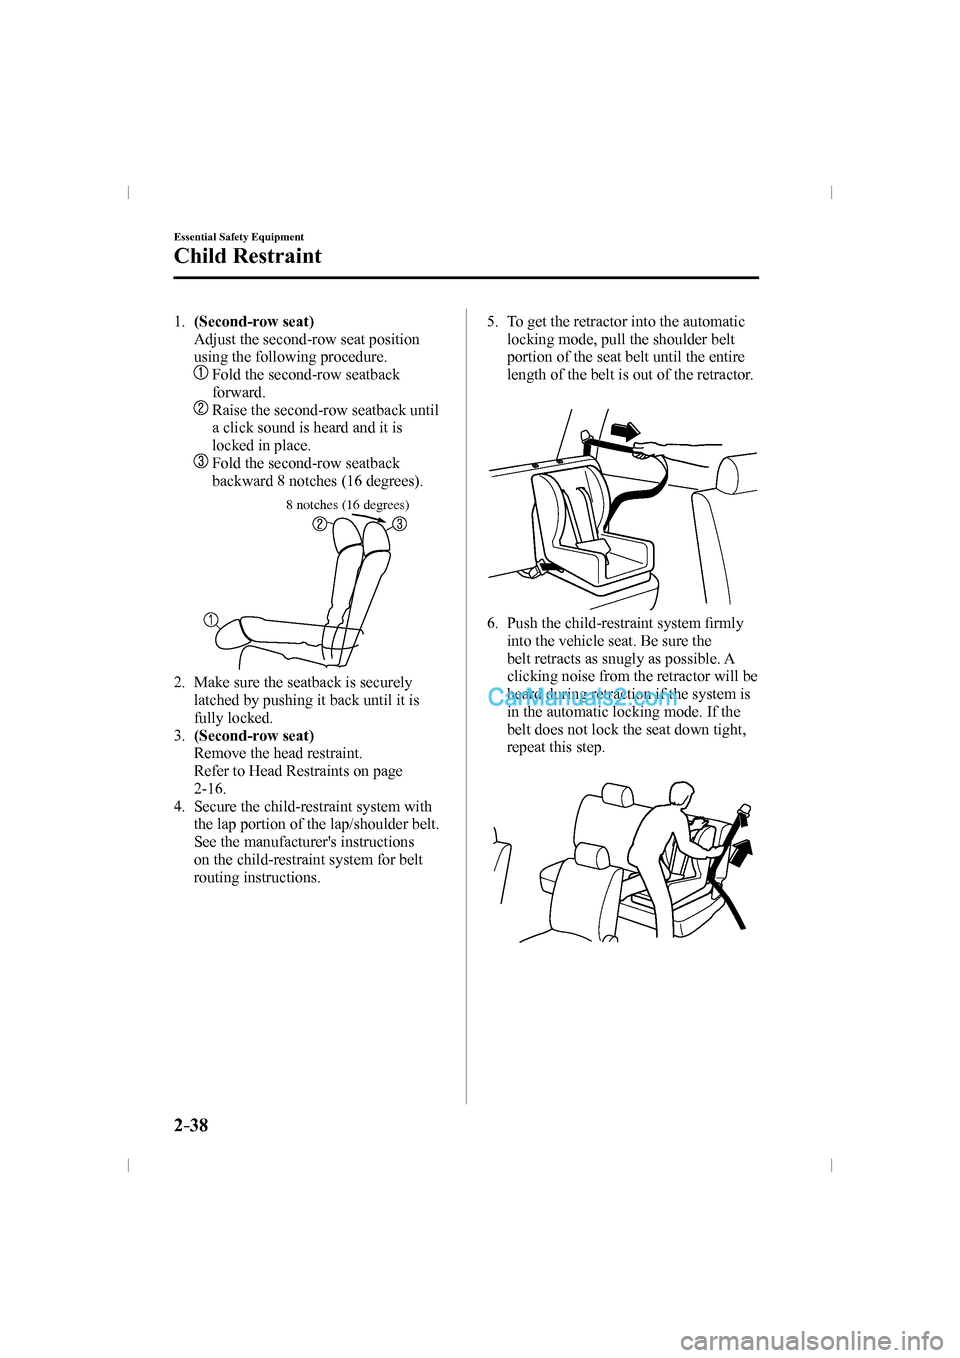 MAZDA MODEL CX-9 2016  Owners Manual (in English) 2–38
Essential Safety Equipment
Child Restraint
 1.    (Second-row seat) 
    Adjust the second-row seat position 
using the following procedure.
     
   Fold the second-row seatback 
forward.
    